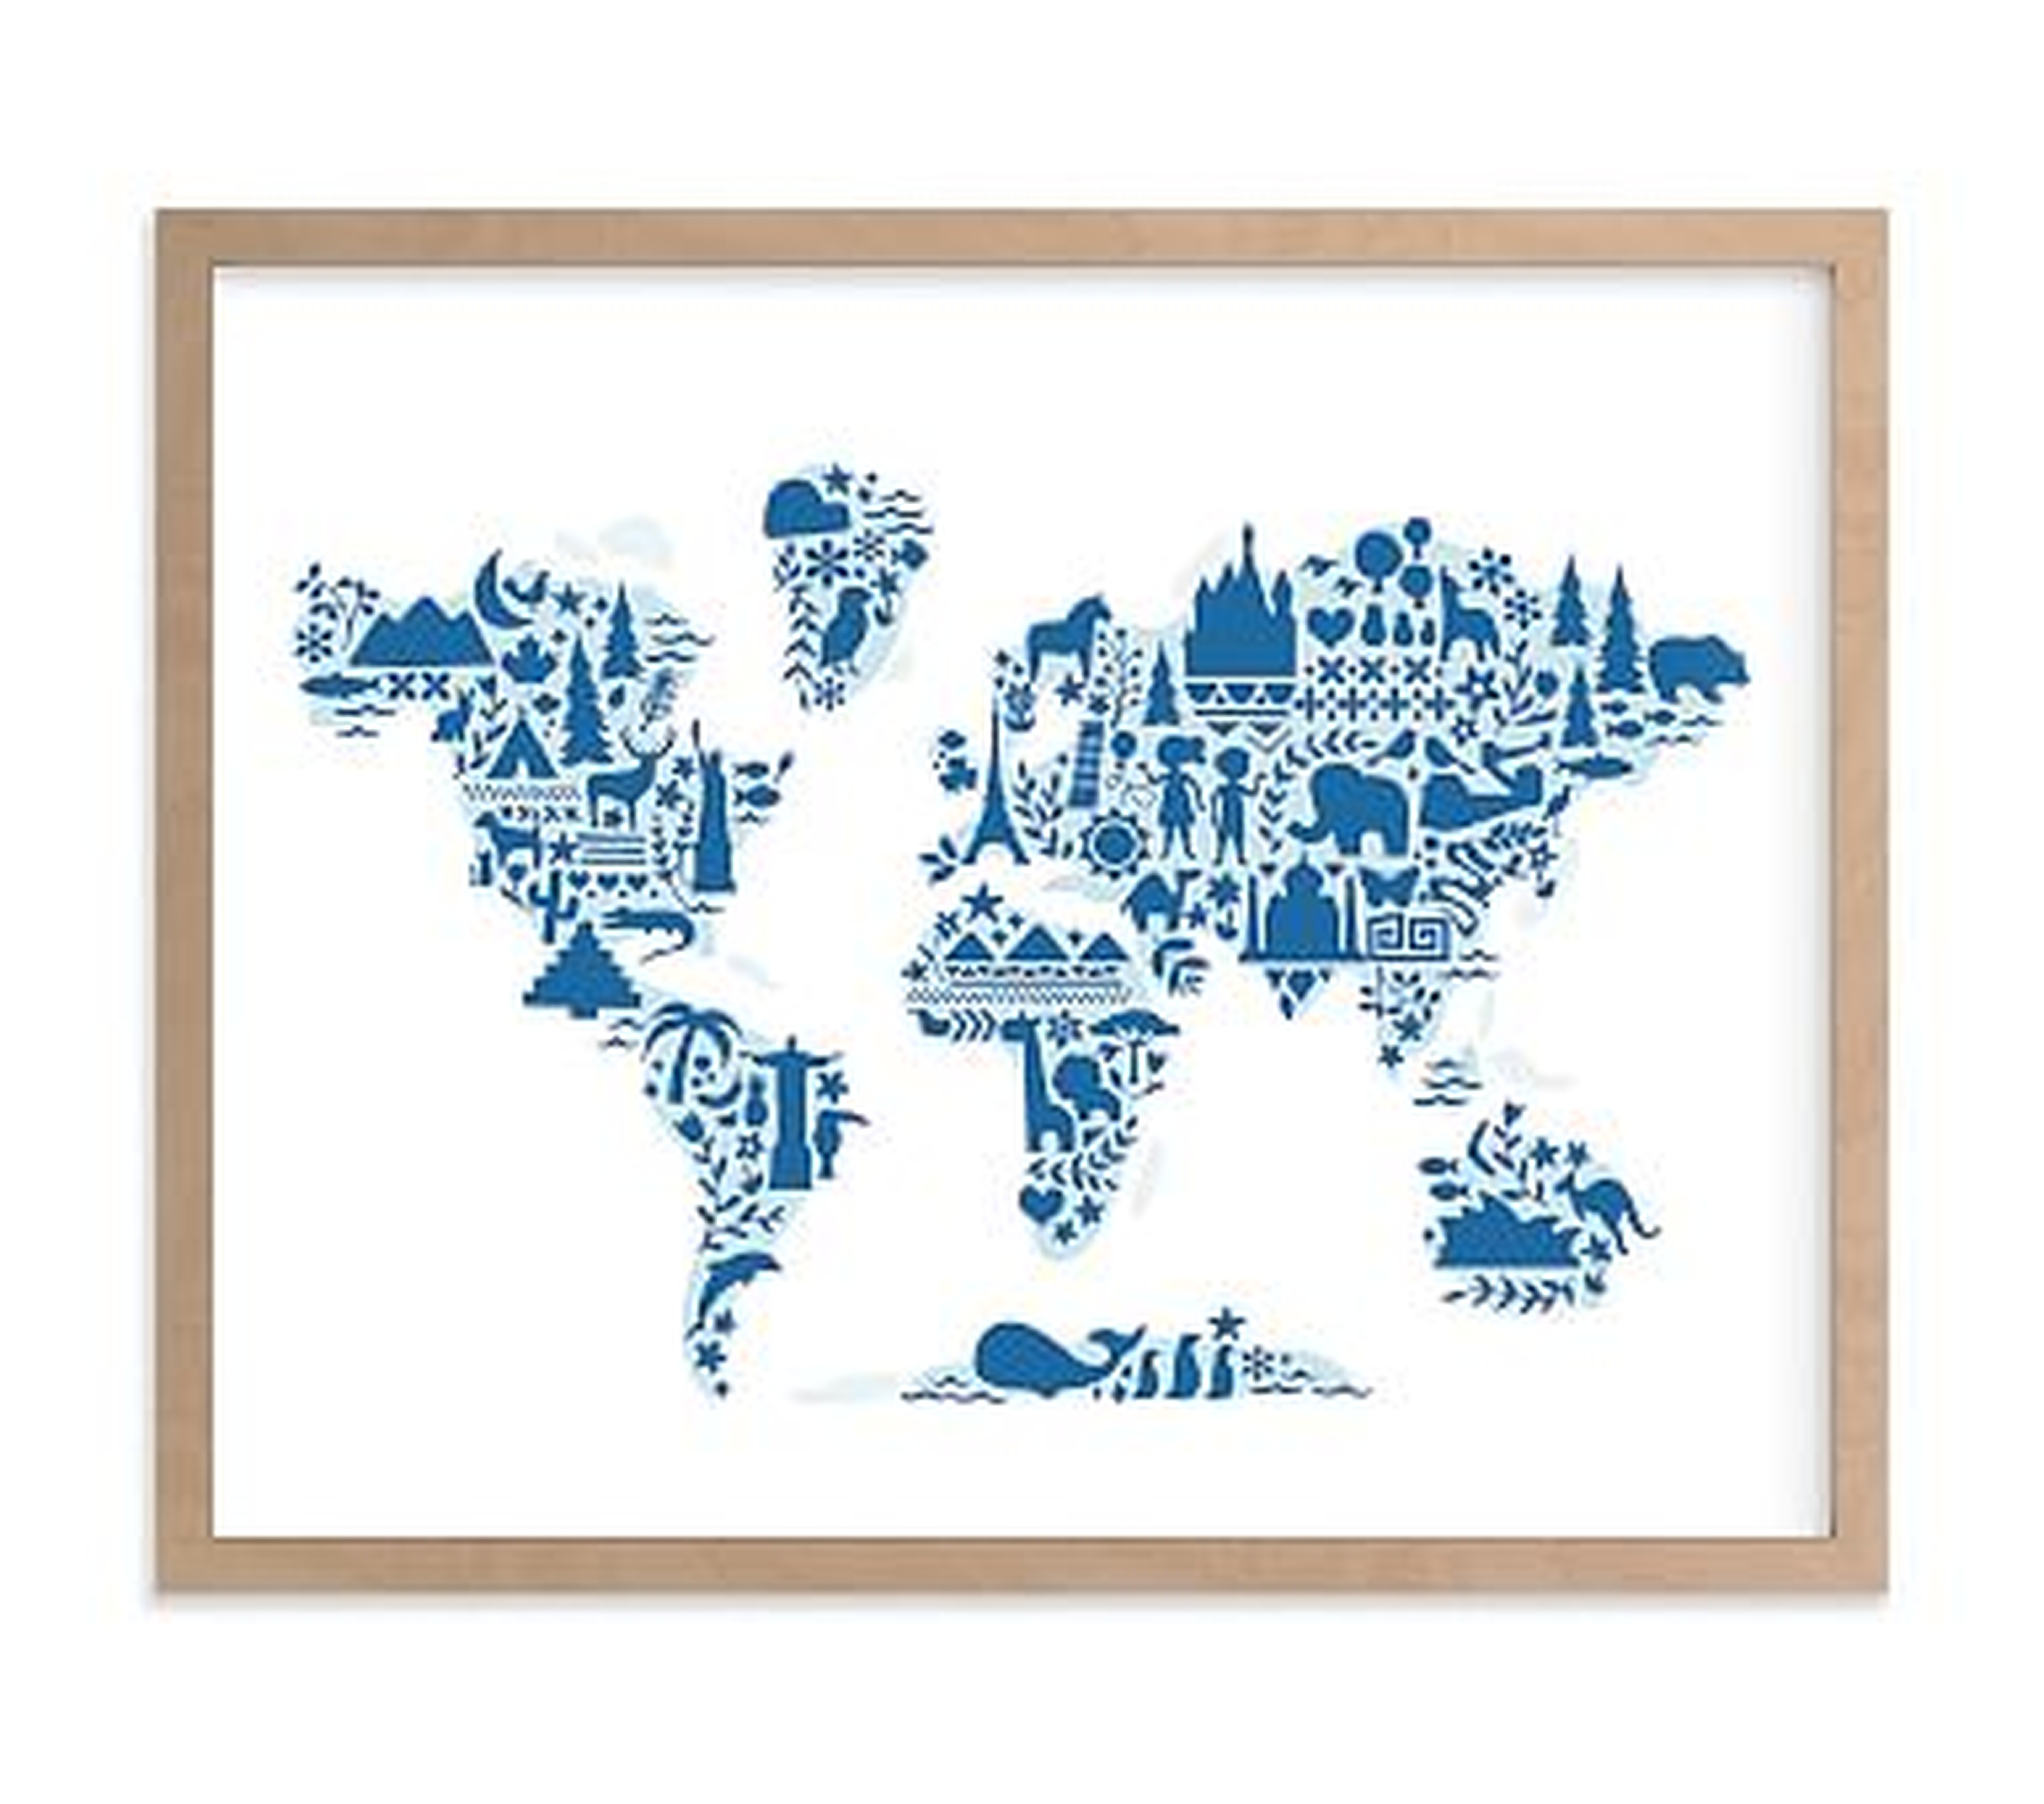 Little Big World Map Wall Art by Minted(R) 40x30, Natural - Pottery Barn Kids